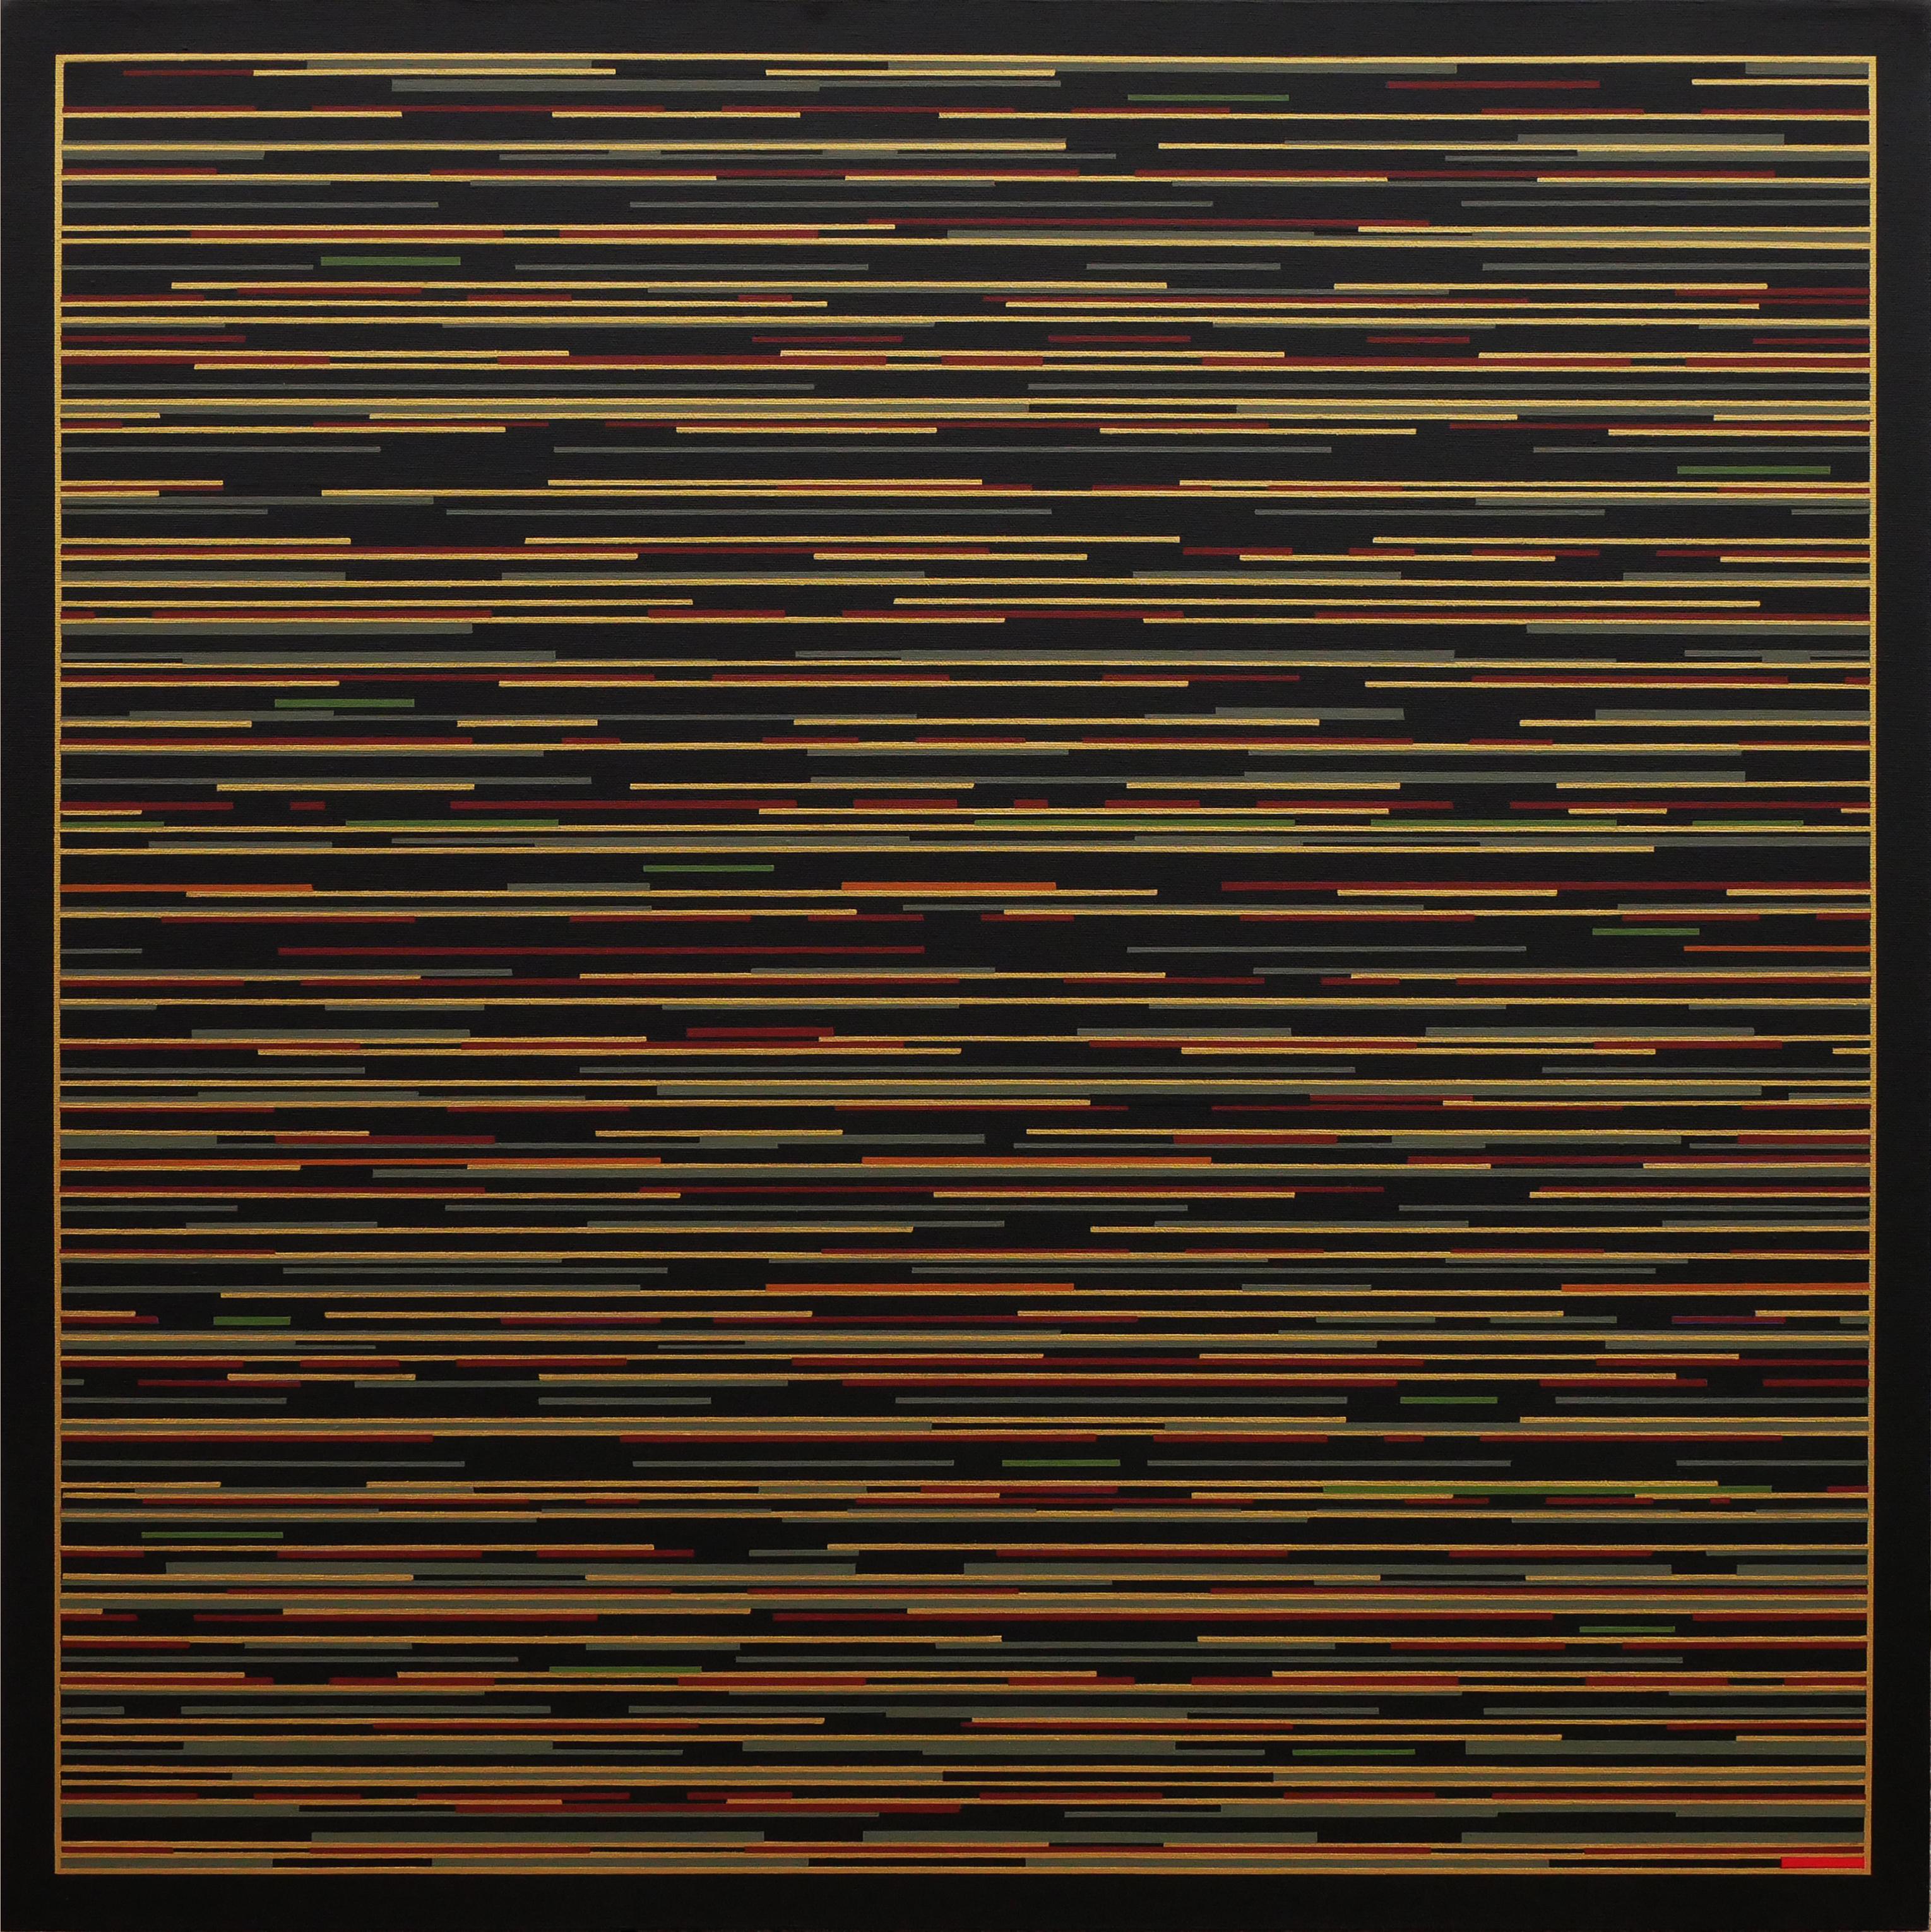 Mark Byckowski Abstract Painting - "VM 1" Yellow and Orange Striped Abstract Geometric Painting